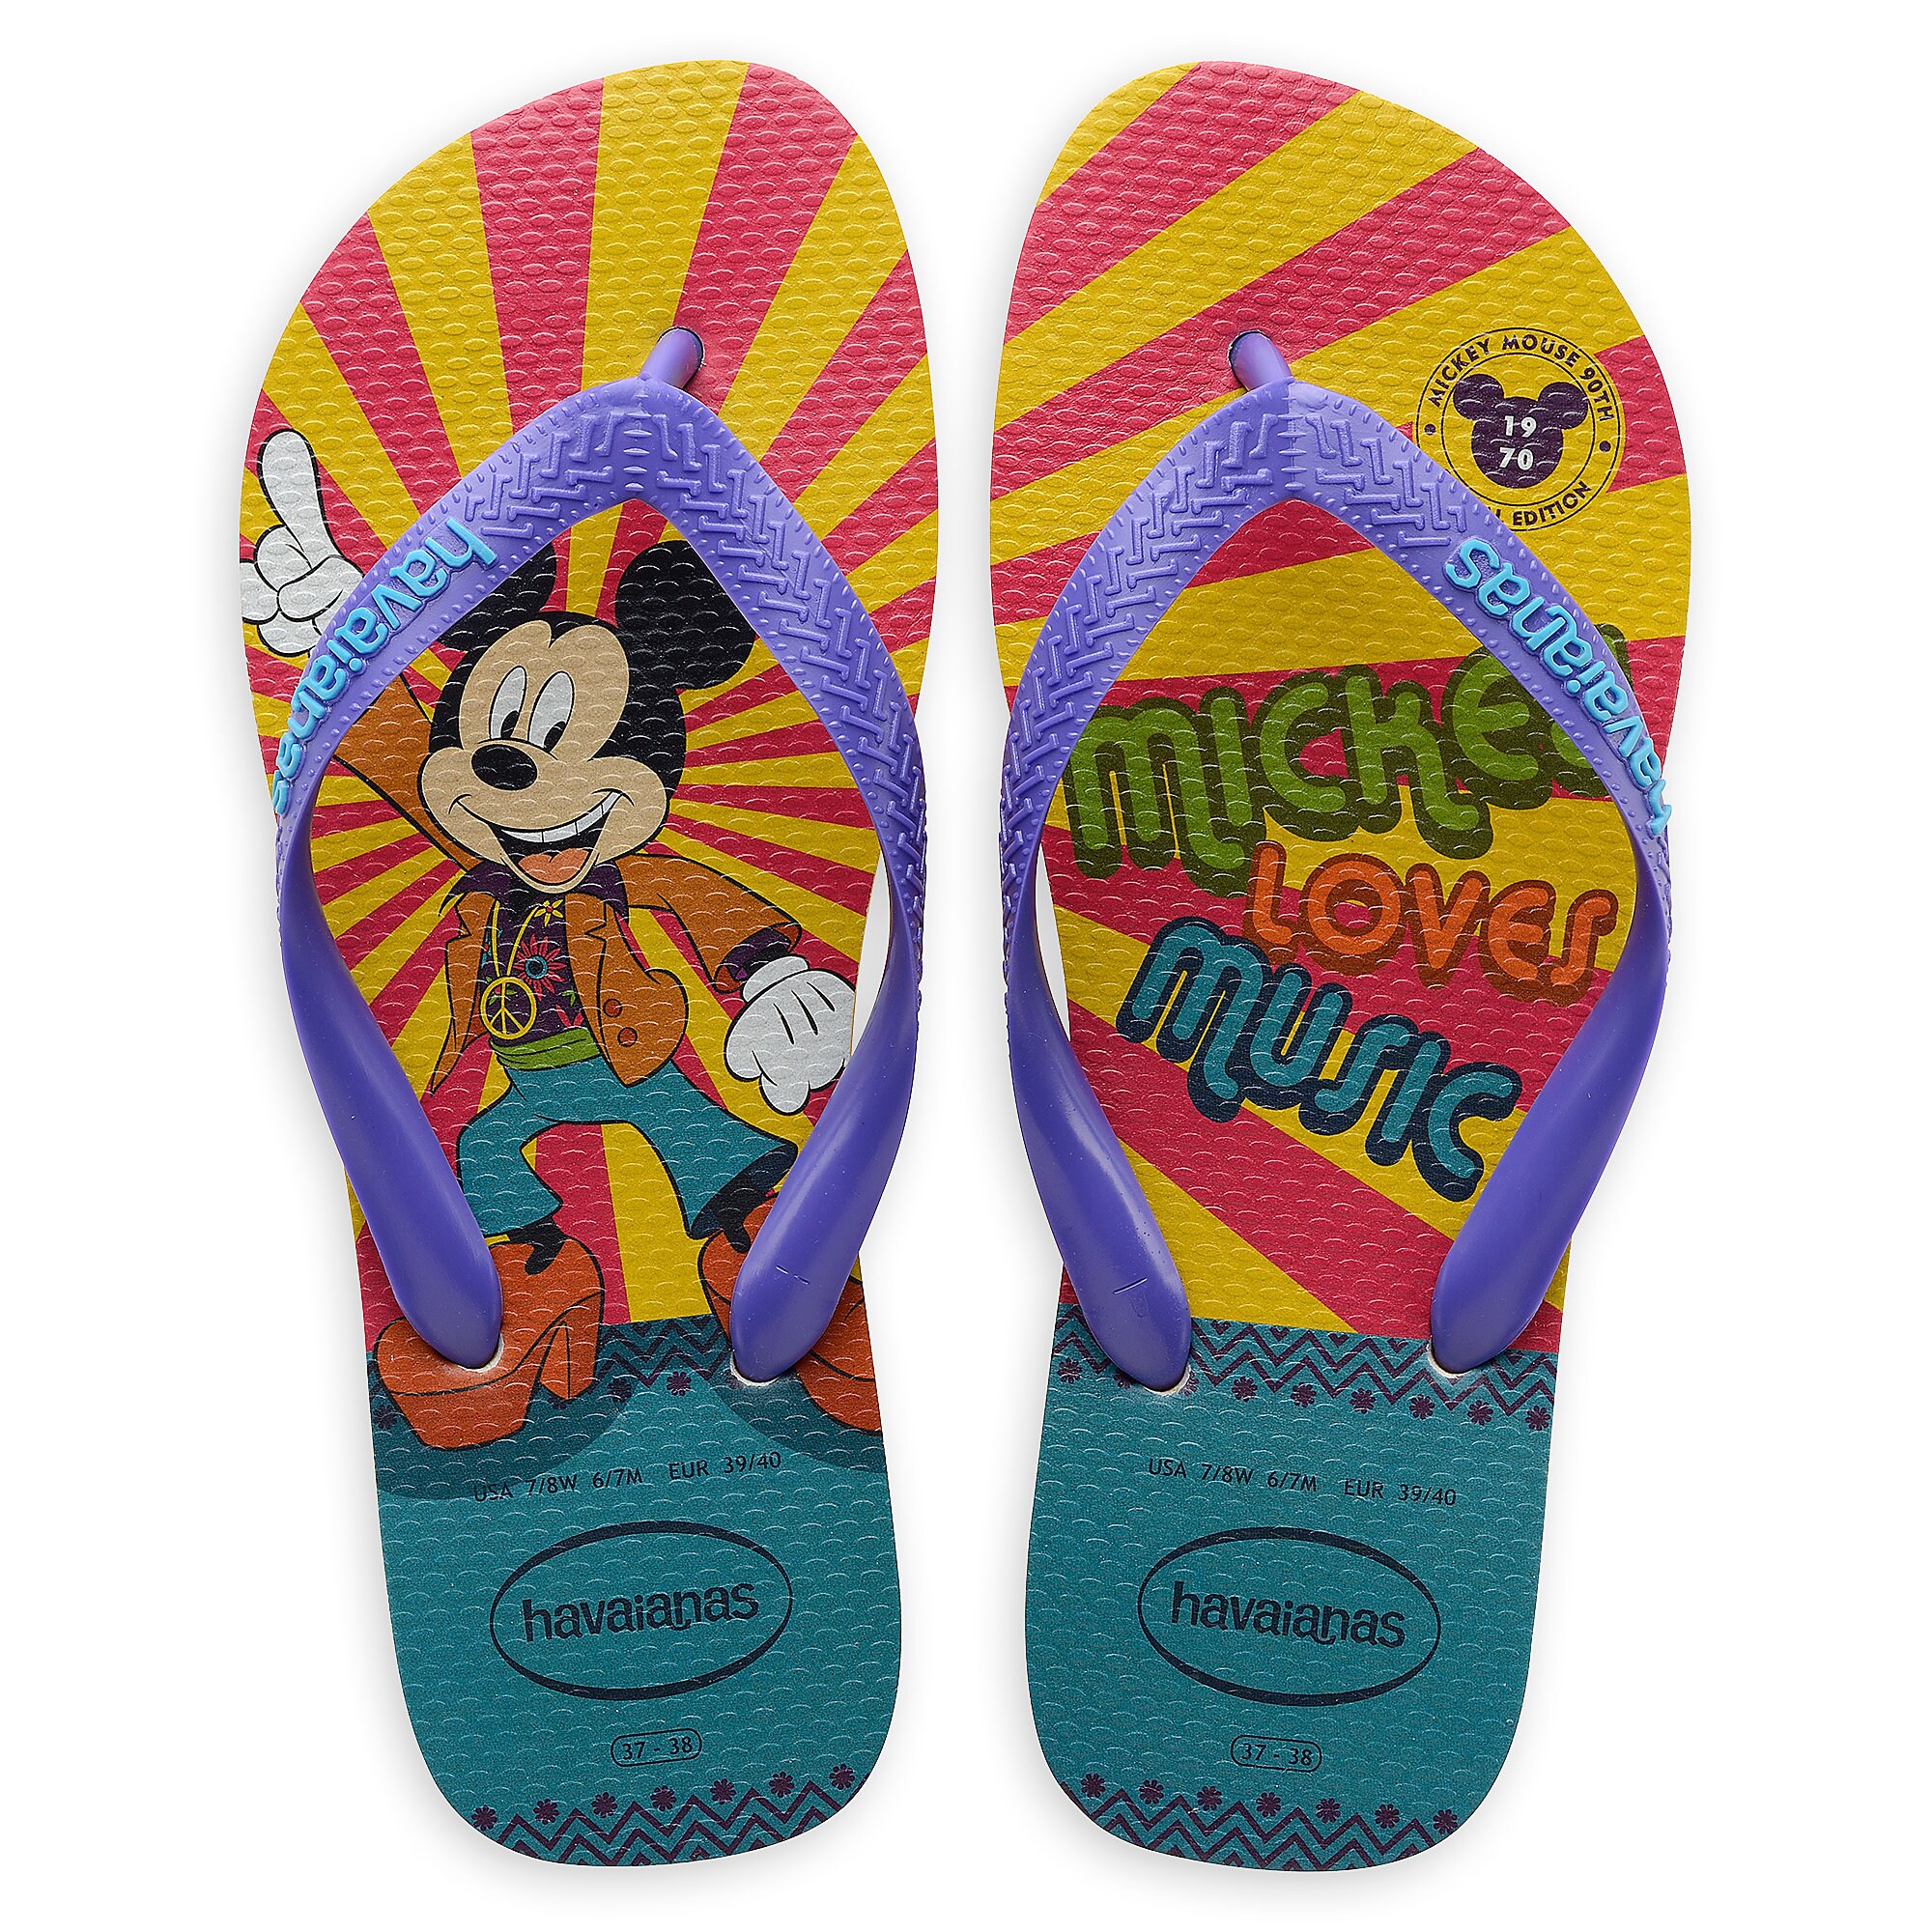 Mickey Mouse Disco Flip Flops for Adults by Havaianas - 1970s